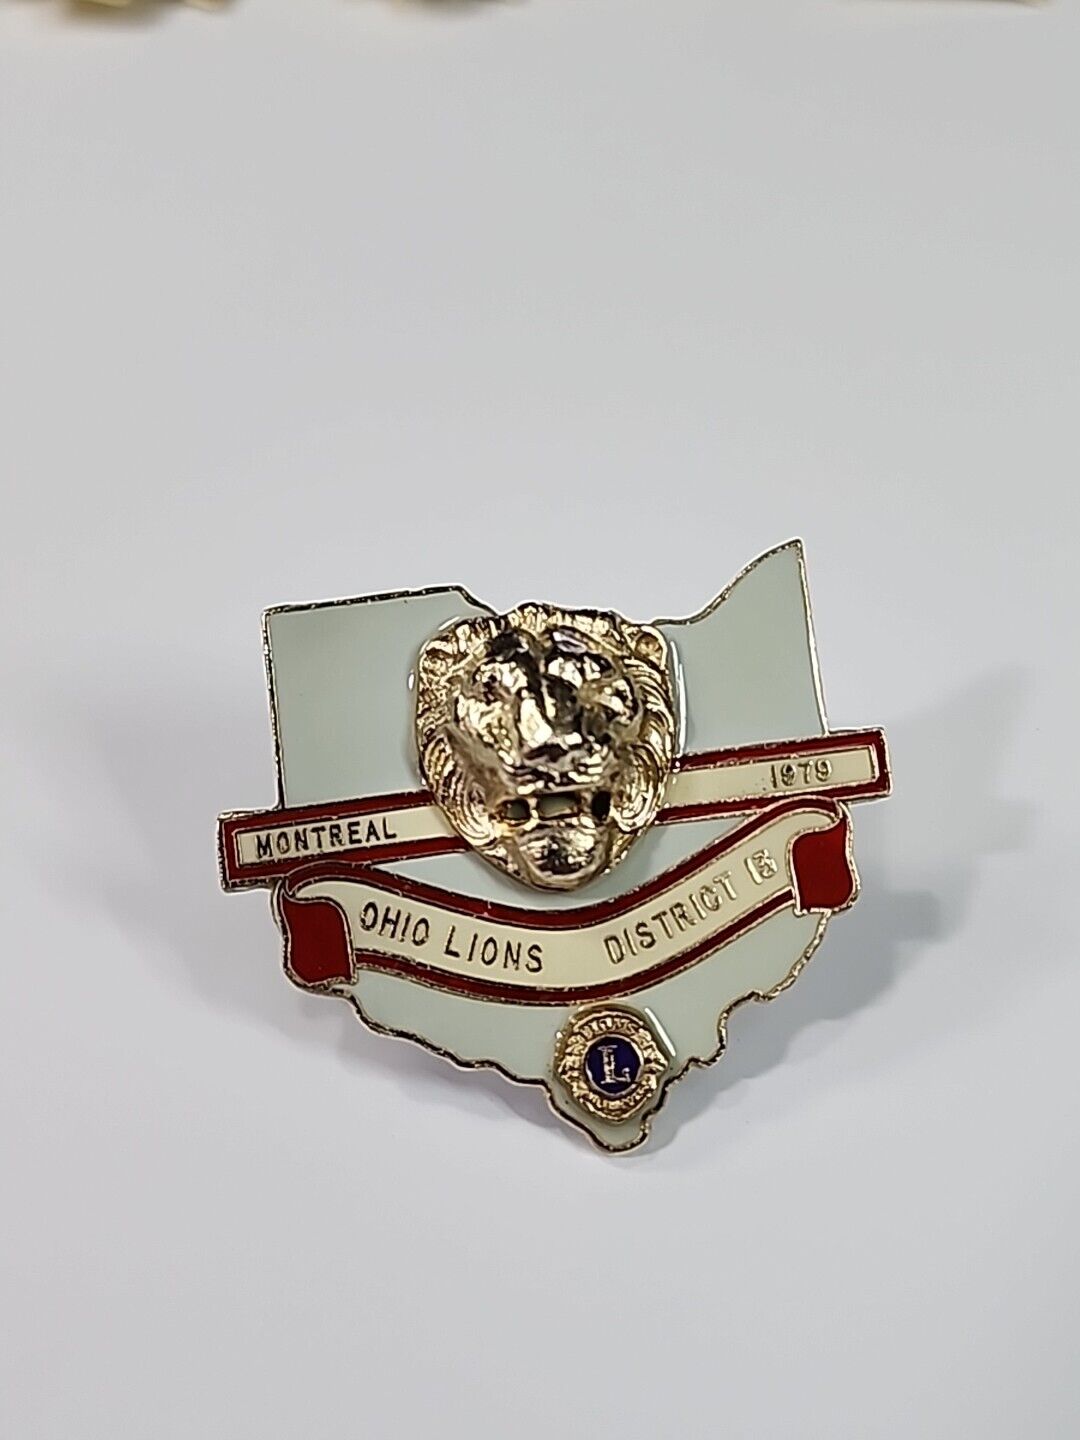 Ohio Lions Club District 13 Badge Pin 1979 Montreal Convention 3D Lion\'s Head